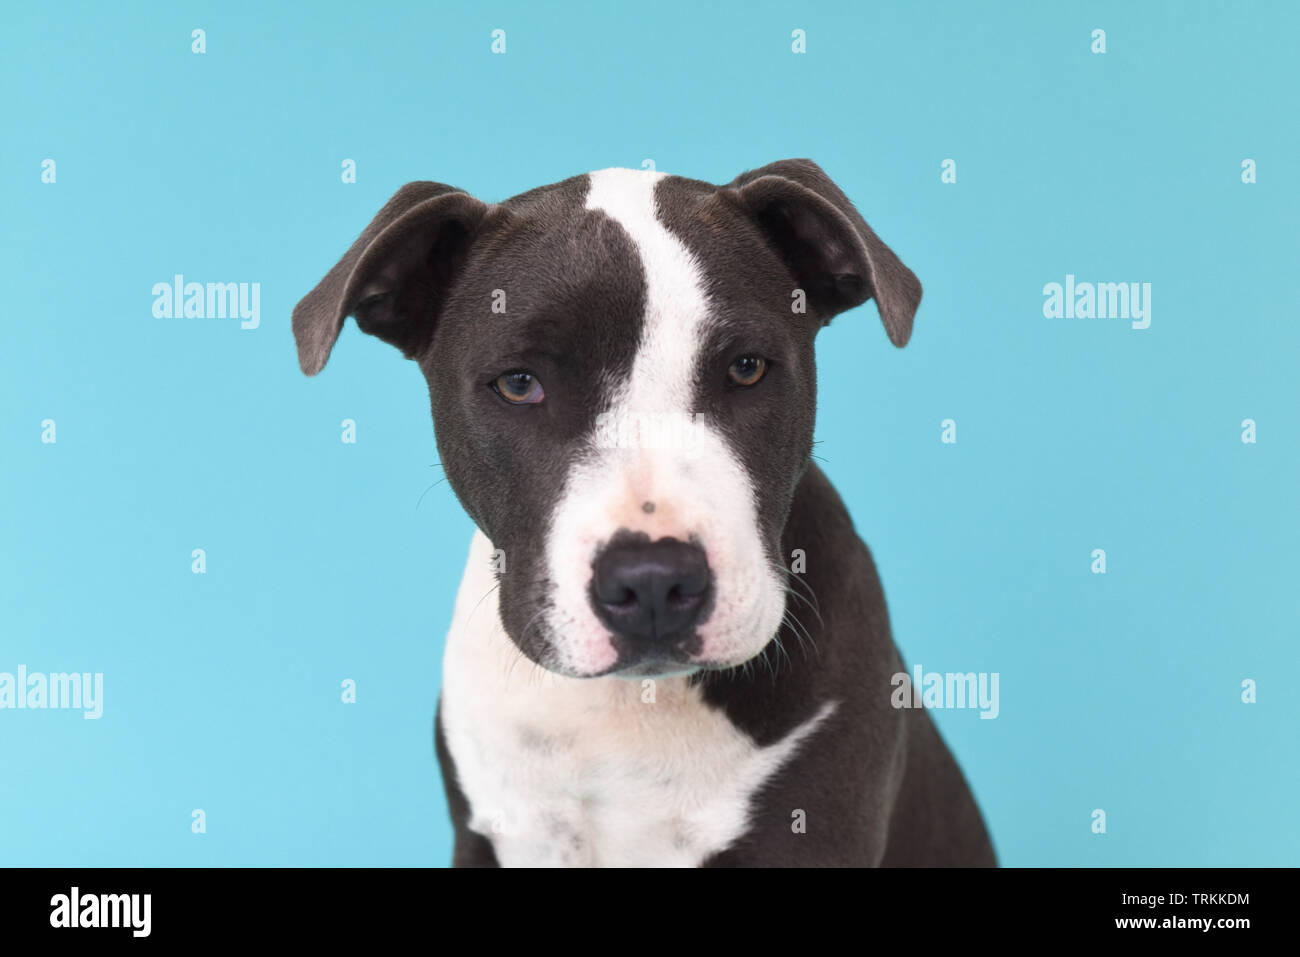 A Grey And White Staffordshire Bull Terrier Puppy Portrait Isolated On A Blank Background Stock Photo Alamy